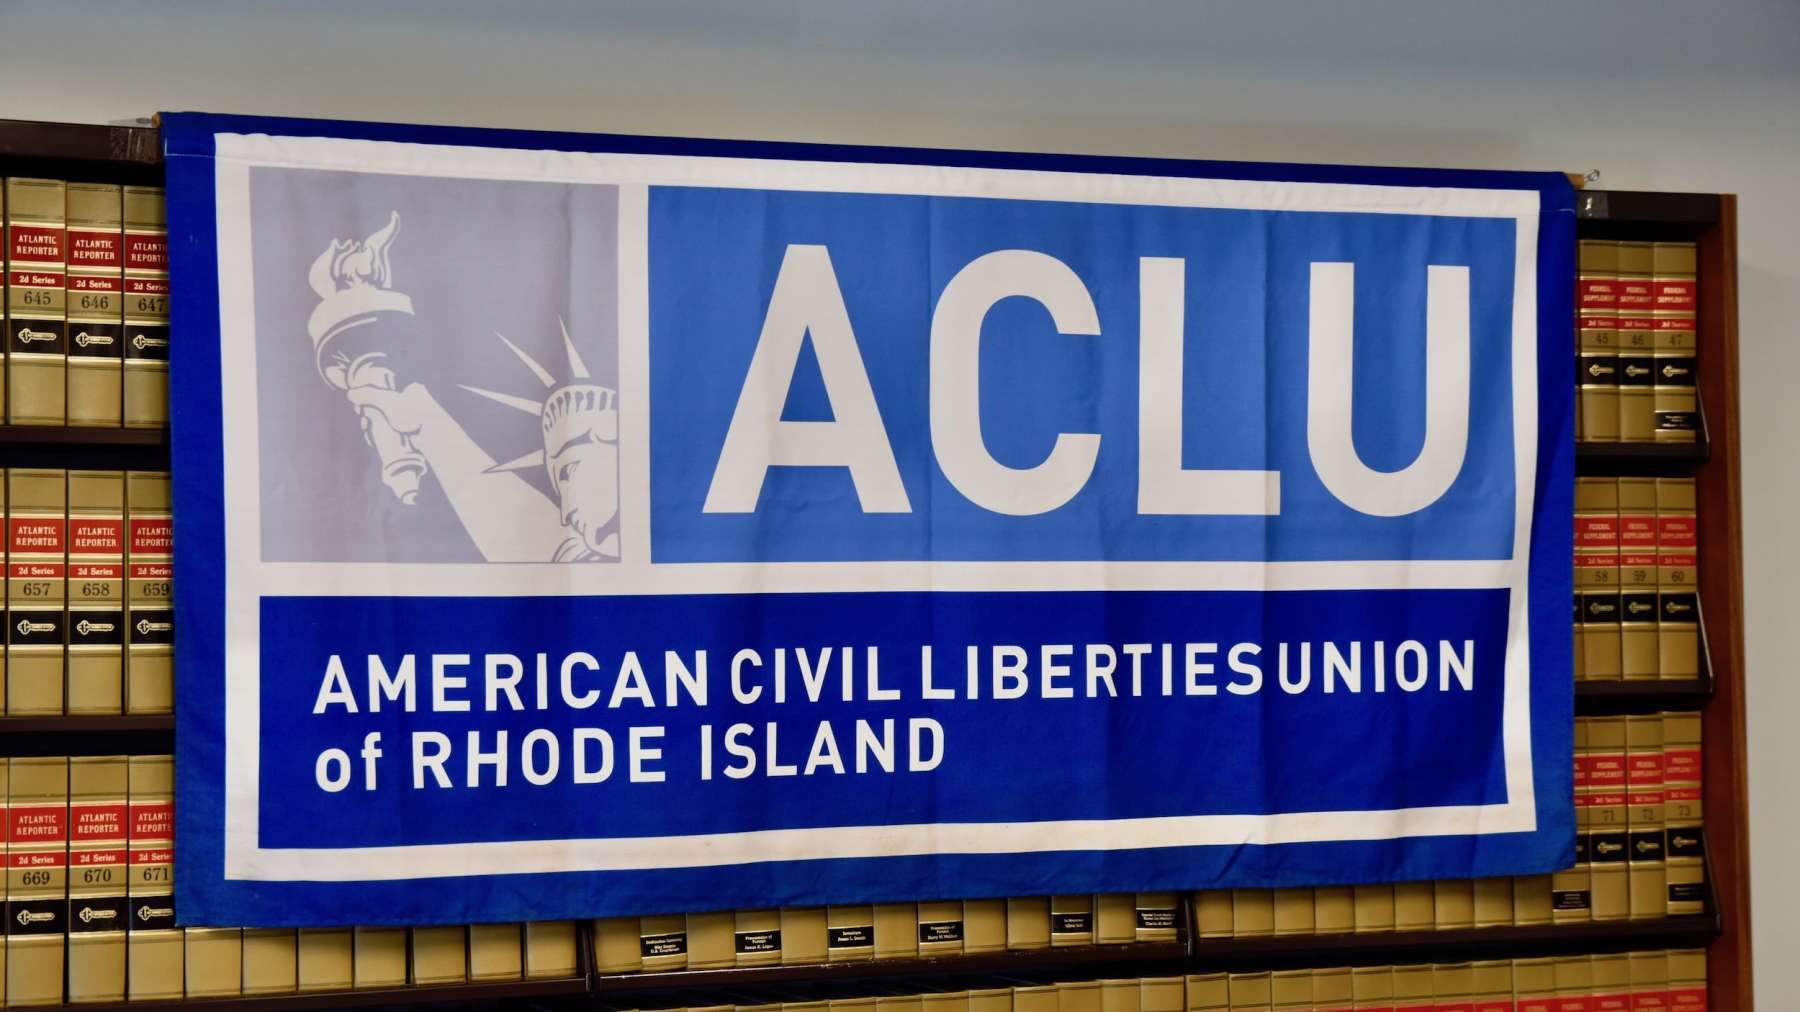 Rhode Island News: Court rules that ban on “offensive” license plates likely violates 1st amendment